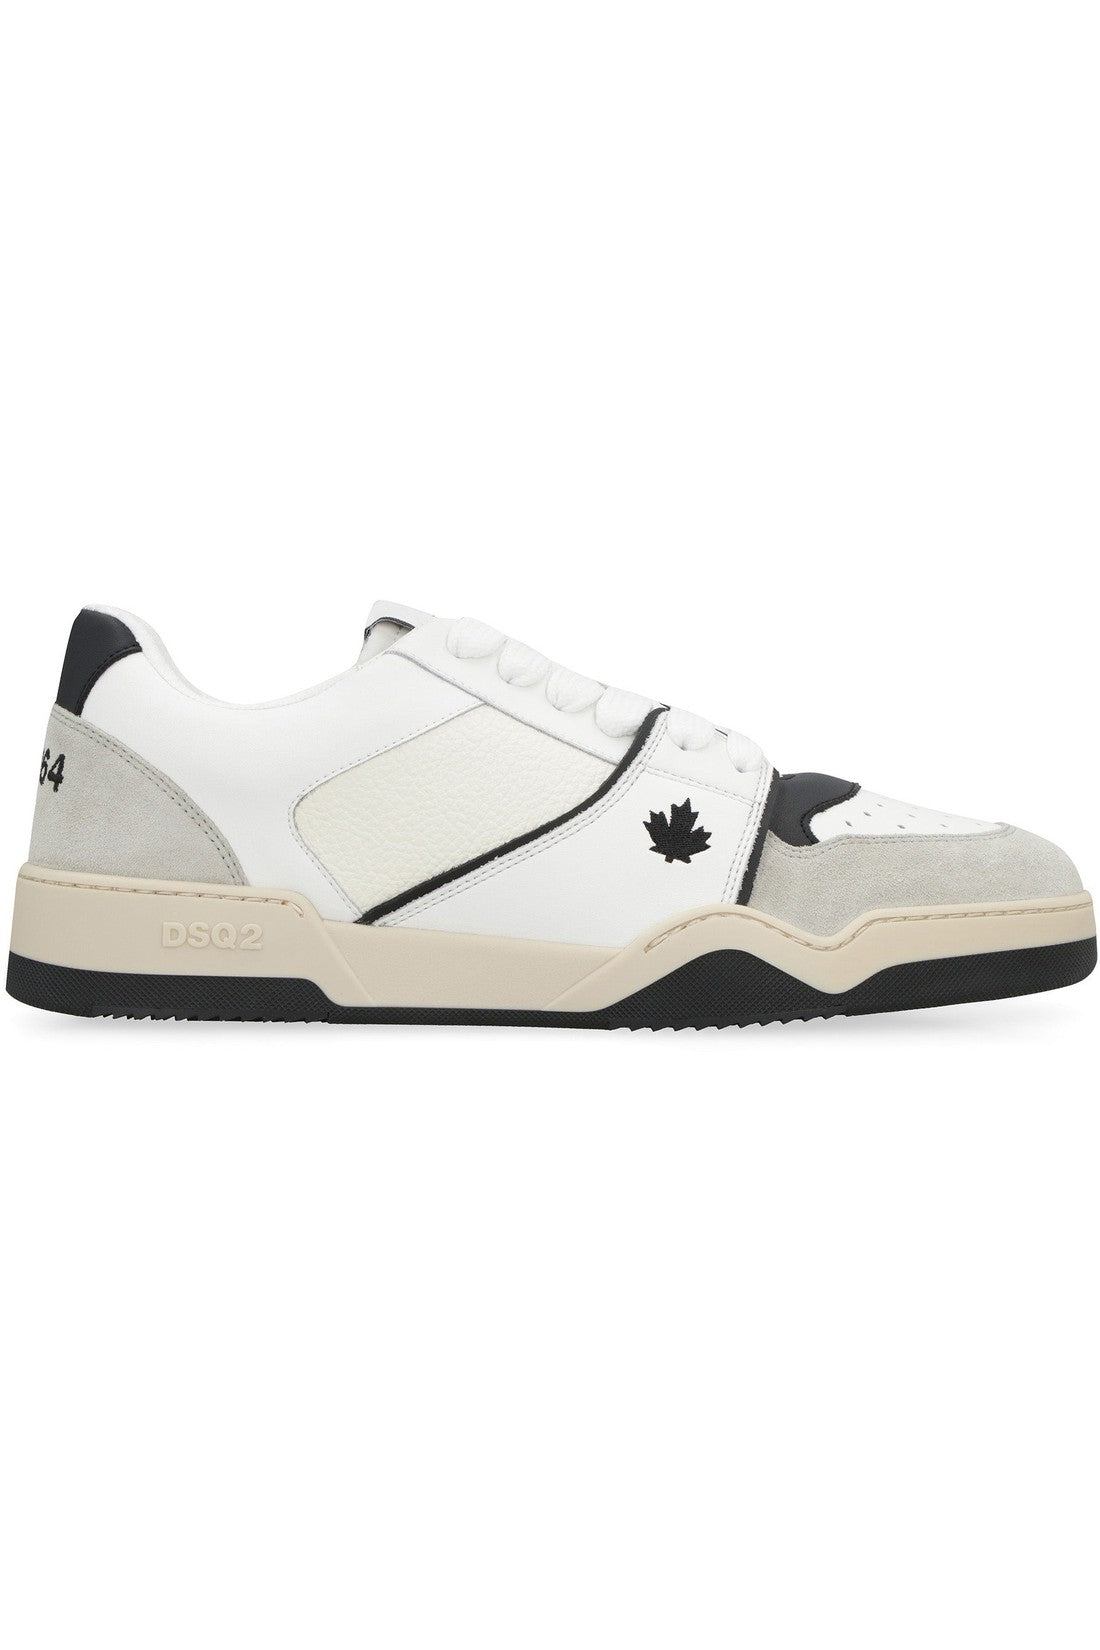 Dsquared2-OUTLET-SALE-Spiker low-top sneakers-ARCHIVIST